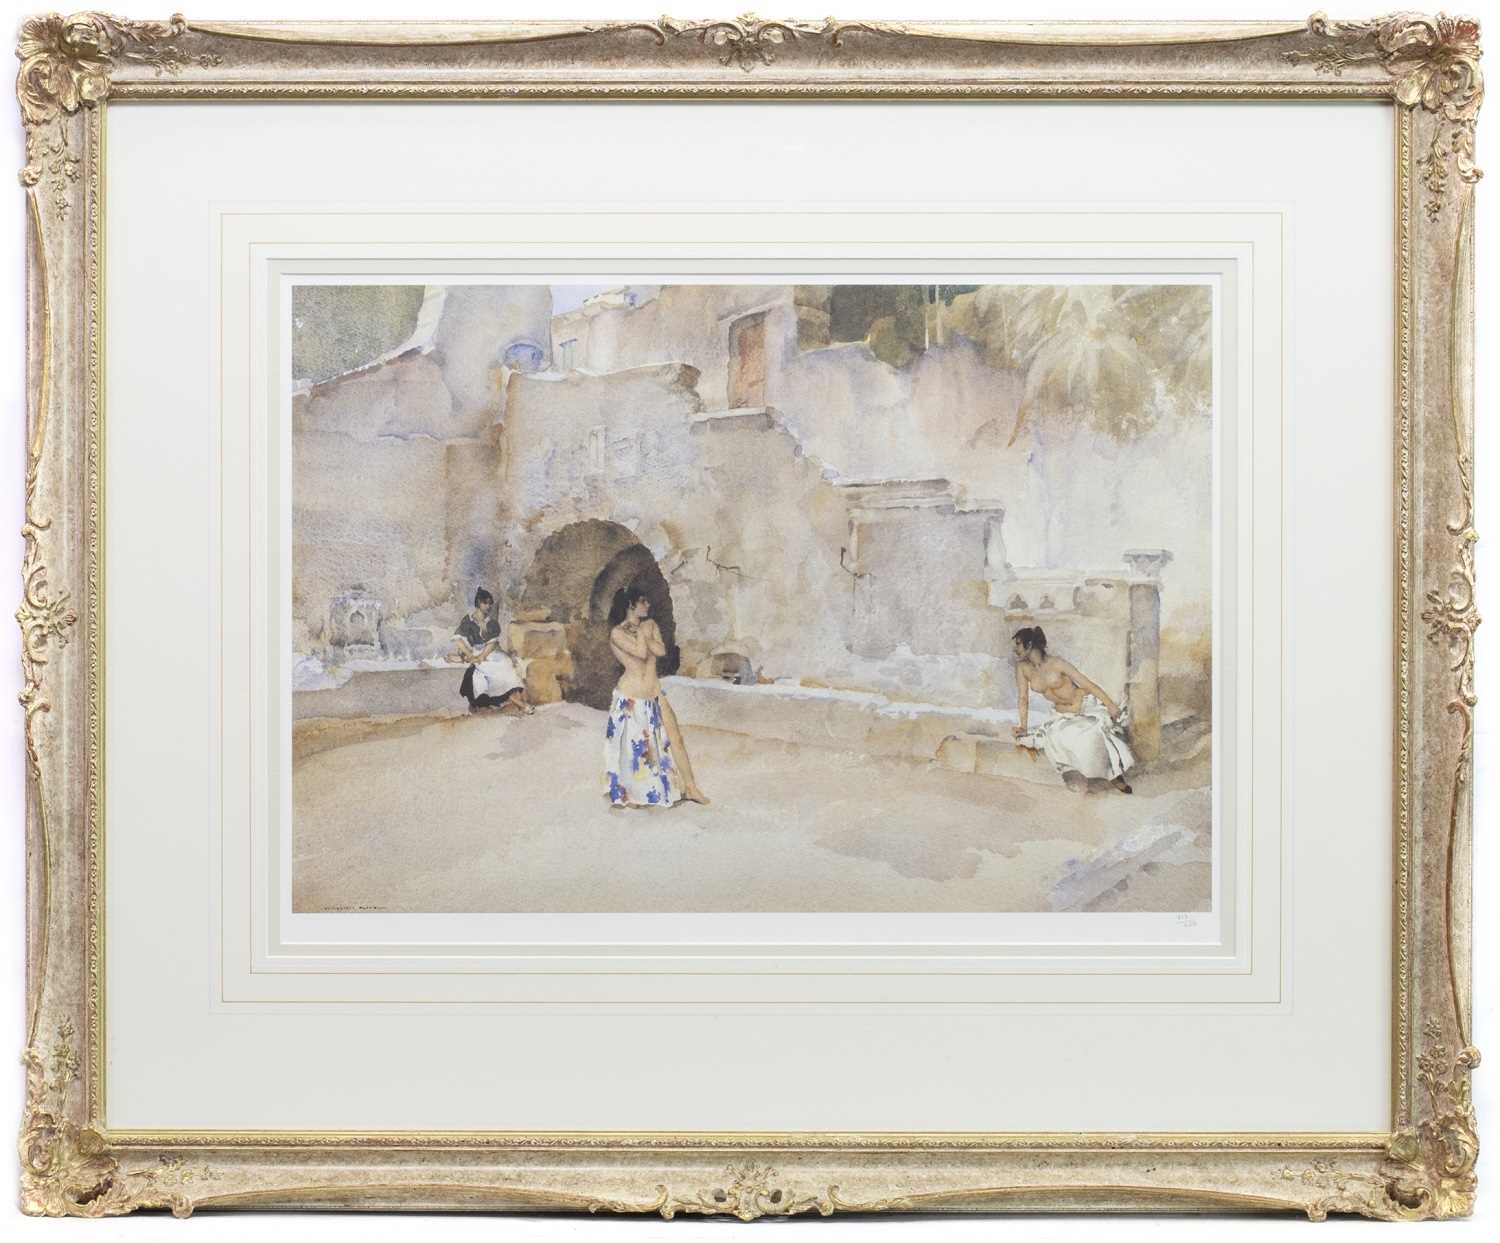 Lot 492 - MODELS IN AN ITALIAN GROVE, A PRINT BY SIR WILLIAM RUSSELL FLINT